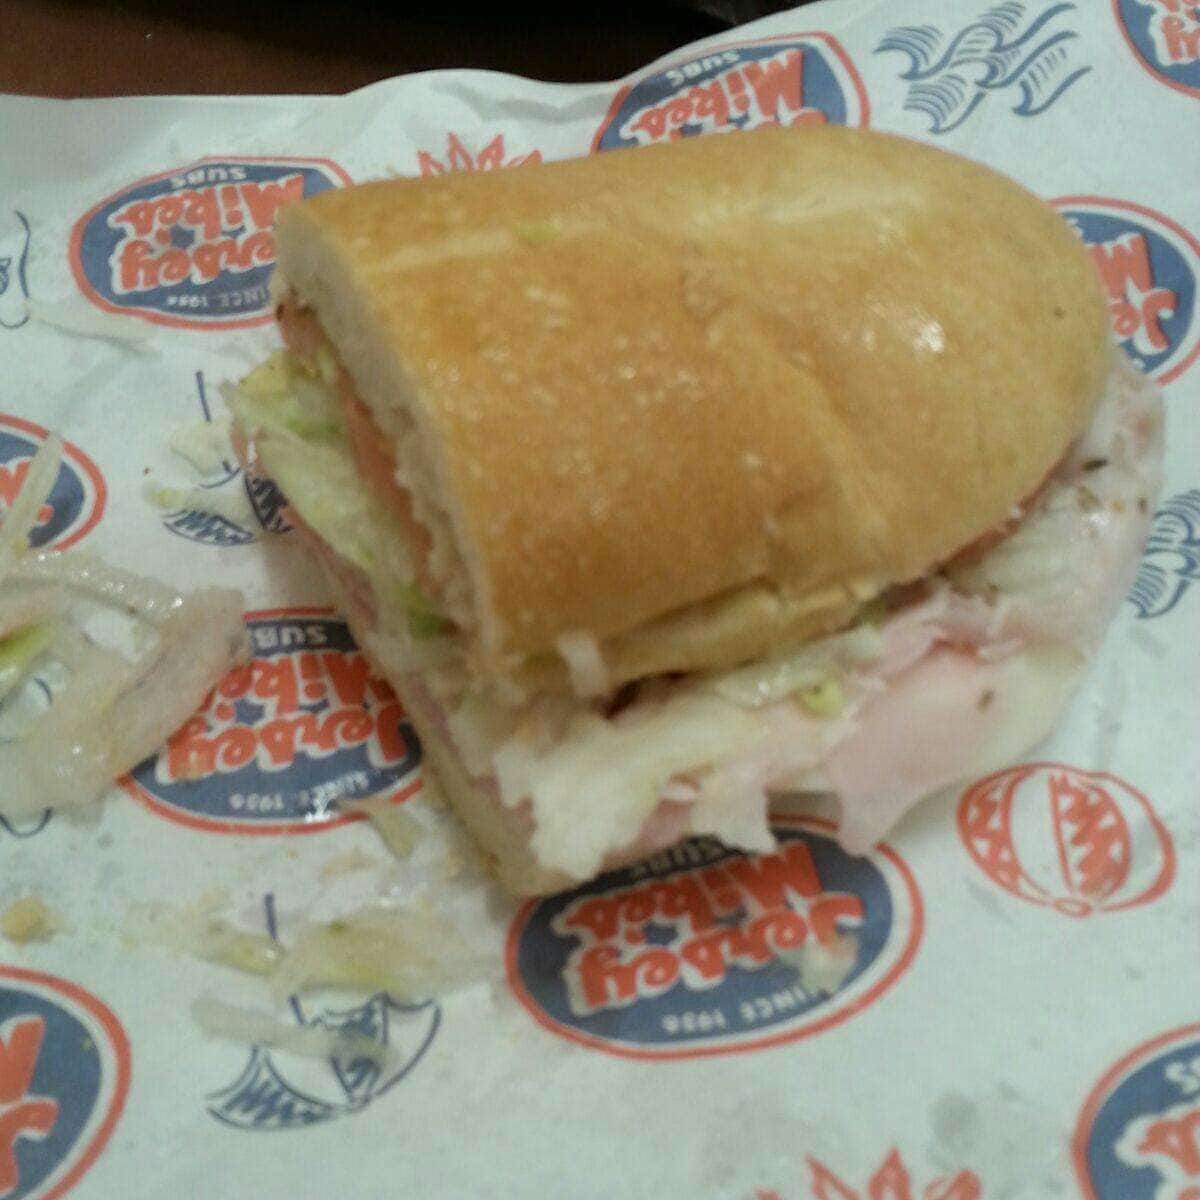 jersey mike's subs timonium